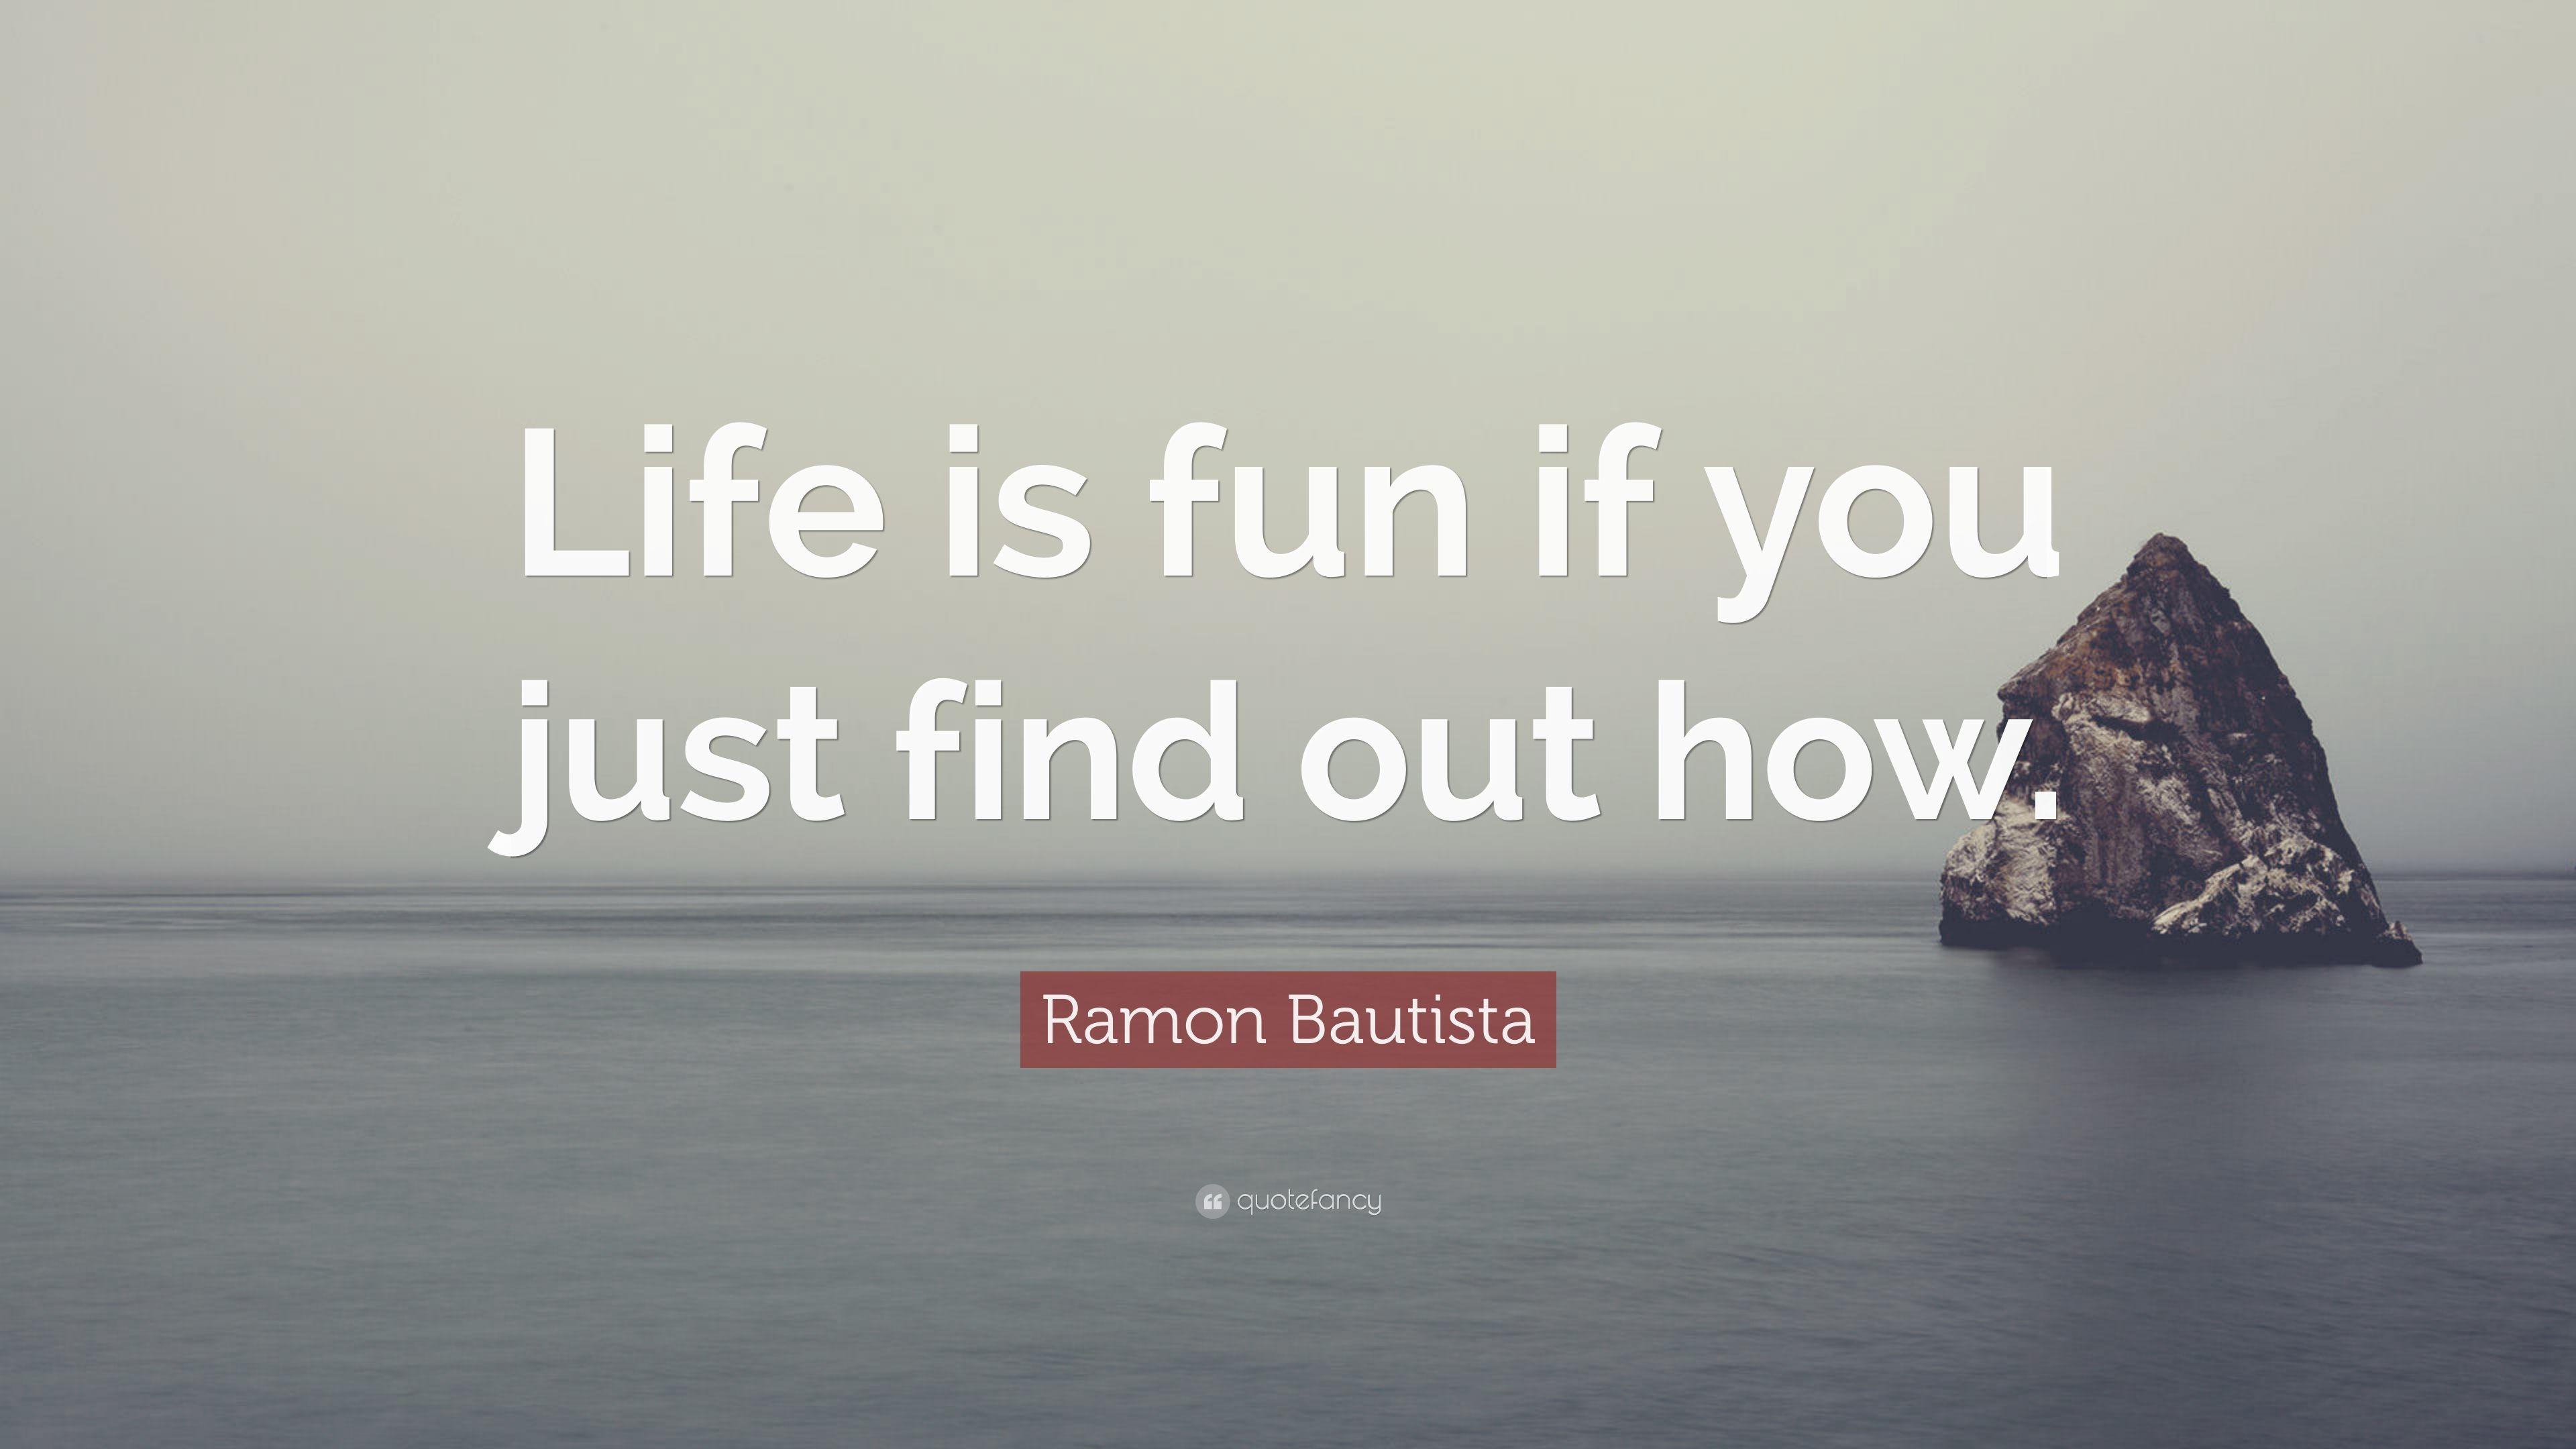 Ramon Bautista Quote: "Life is fun if you just find out how.